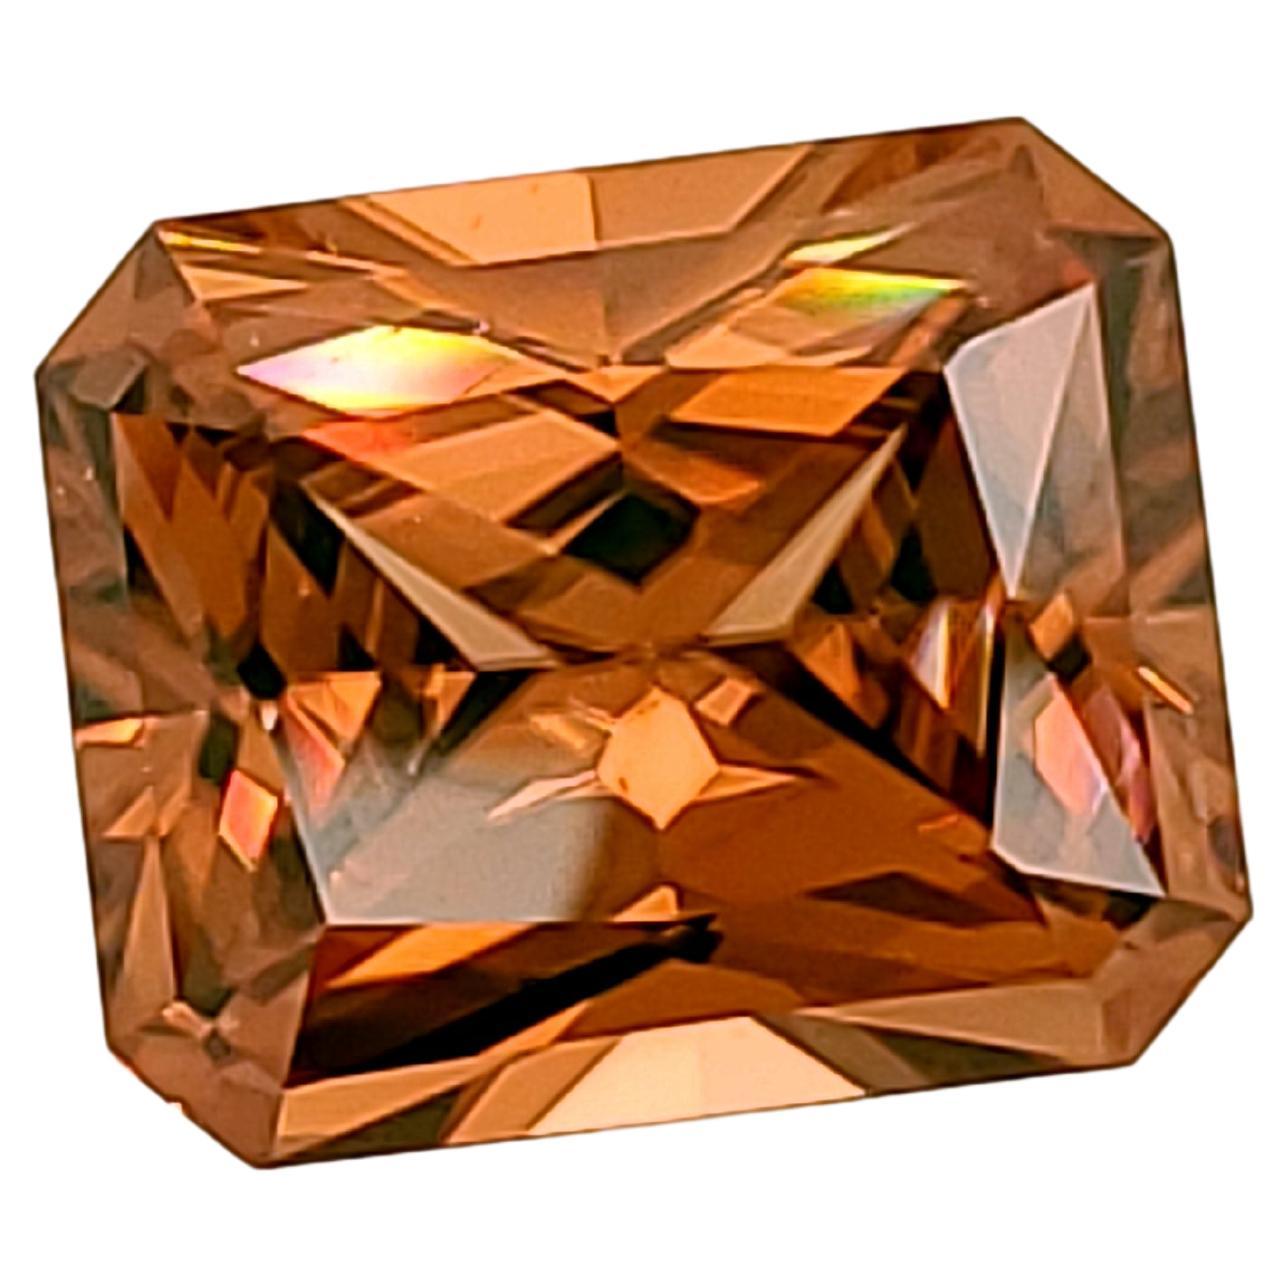 Orangy Zircon, Emerald Cut, weighing 8.71ct and Faceted in the U.S.